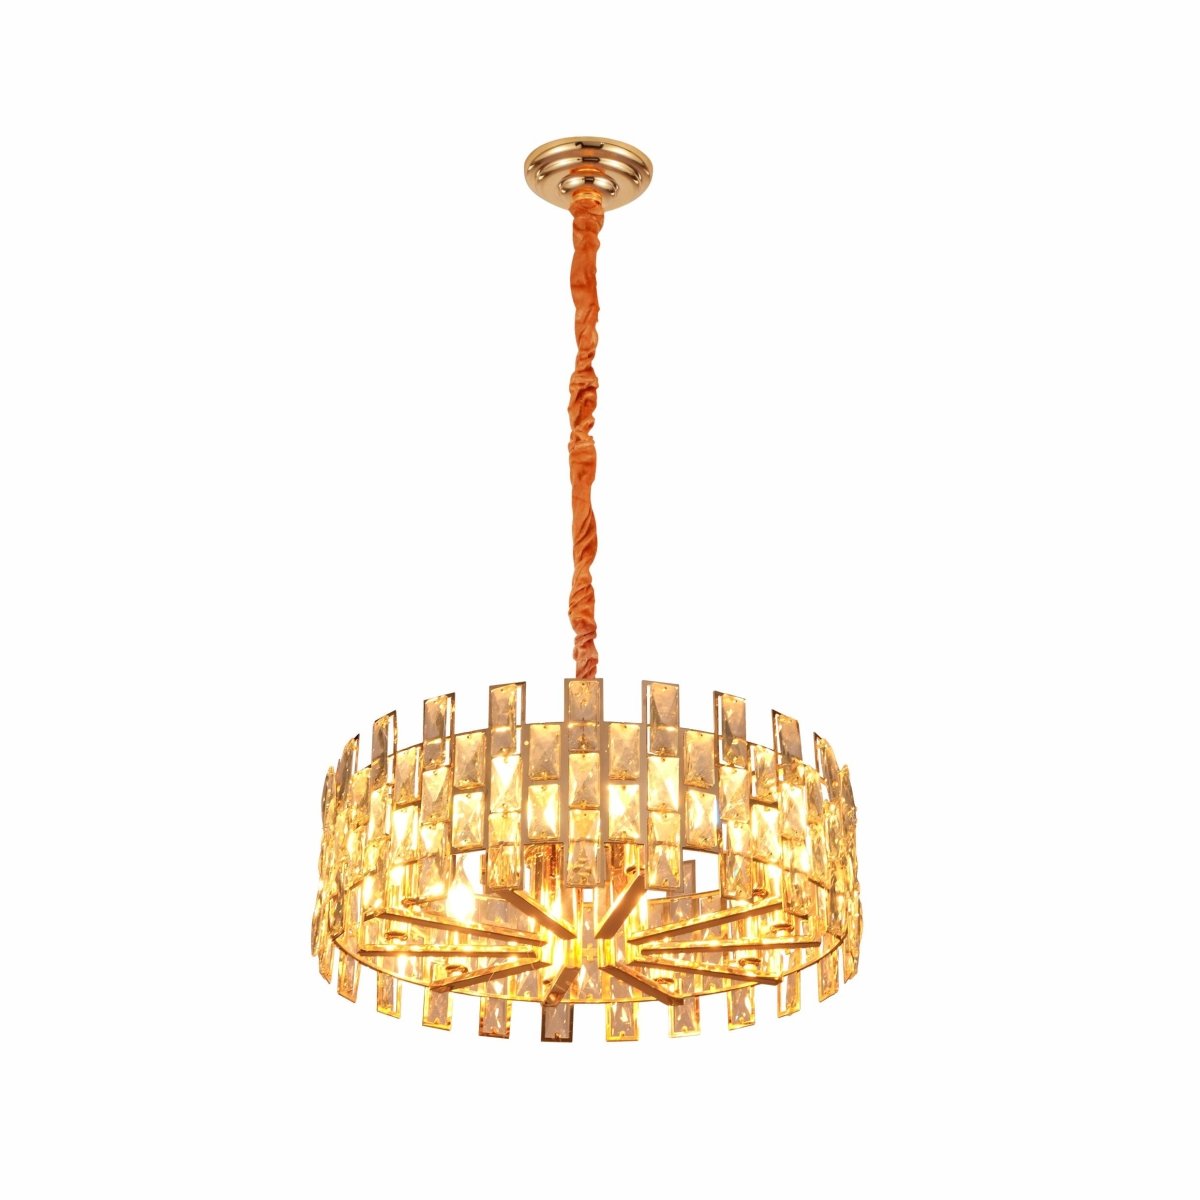 Main image of Coffin Stone Gold Metal Castle Crystal Island Chandelier Ceiling Light with E14 Fitting | TEKLED 158-19424